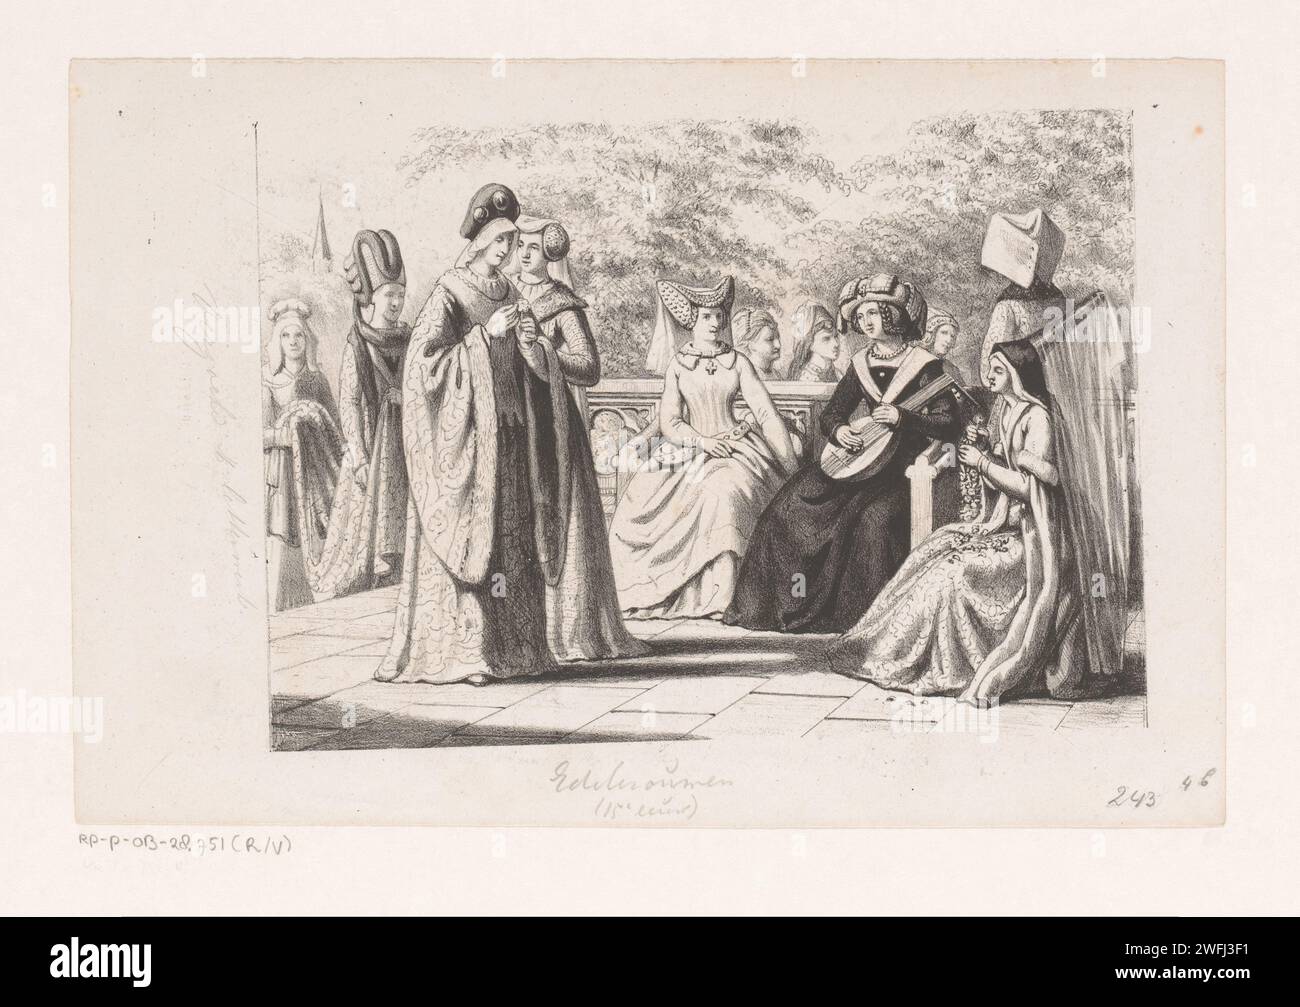 Edelvrouwen in the fifteenth century, David van der Kellen (1827-1895), 1857 - 1864 print The red women are outside. On the right is a woman with a flower wreath and a pointed hat with drag. She receives a woman with a flower addressed by another woman. A woman with a maid is waiting behind it. Haarlem paper  nobility and patriciate; chivalry, knighthood. audition; ruler giving audience - BB - female ruler. lute, and special forms of lute, e.g.: theorbo. cut flowers; nosegay, bunch of flowers. garland, wreath Stock Photo